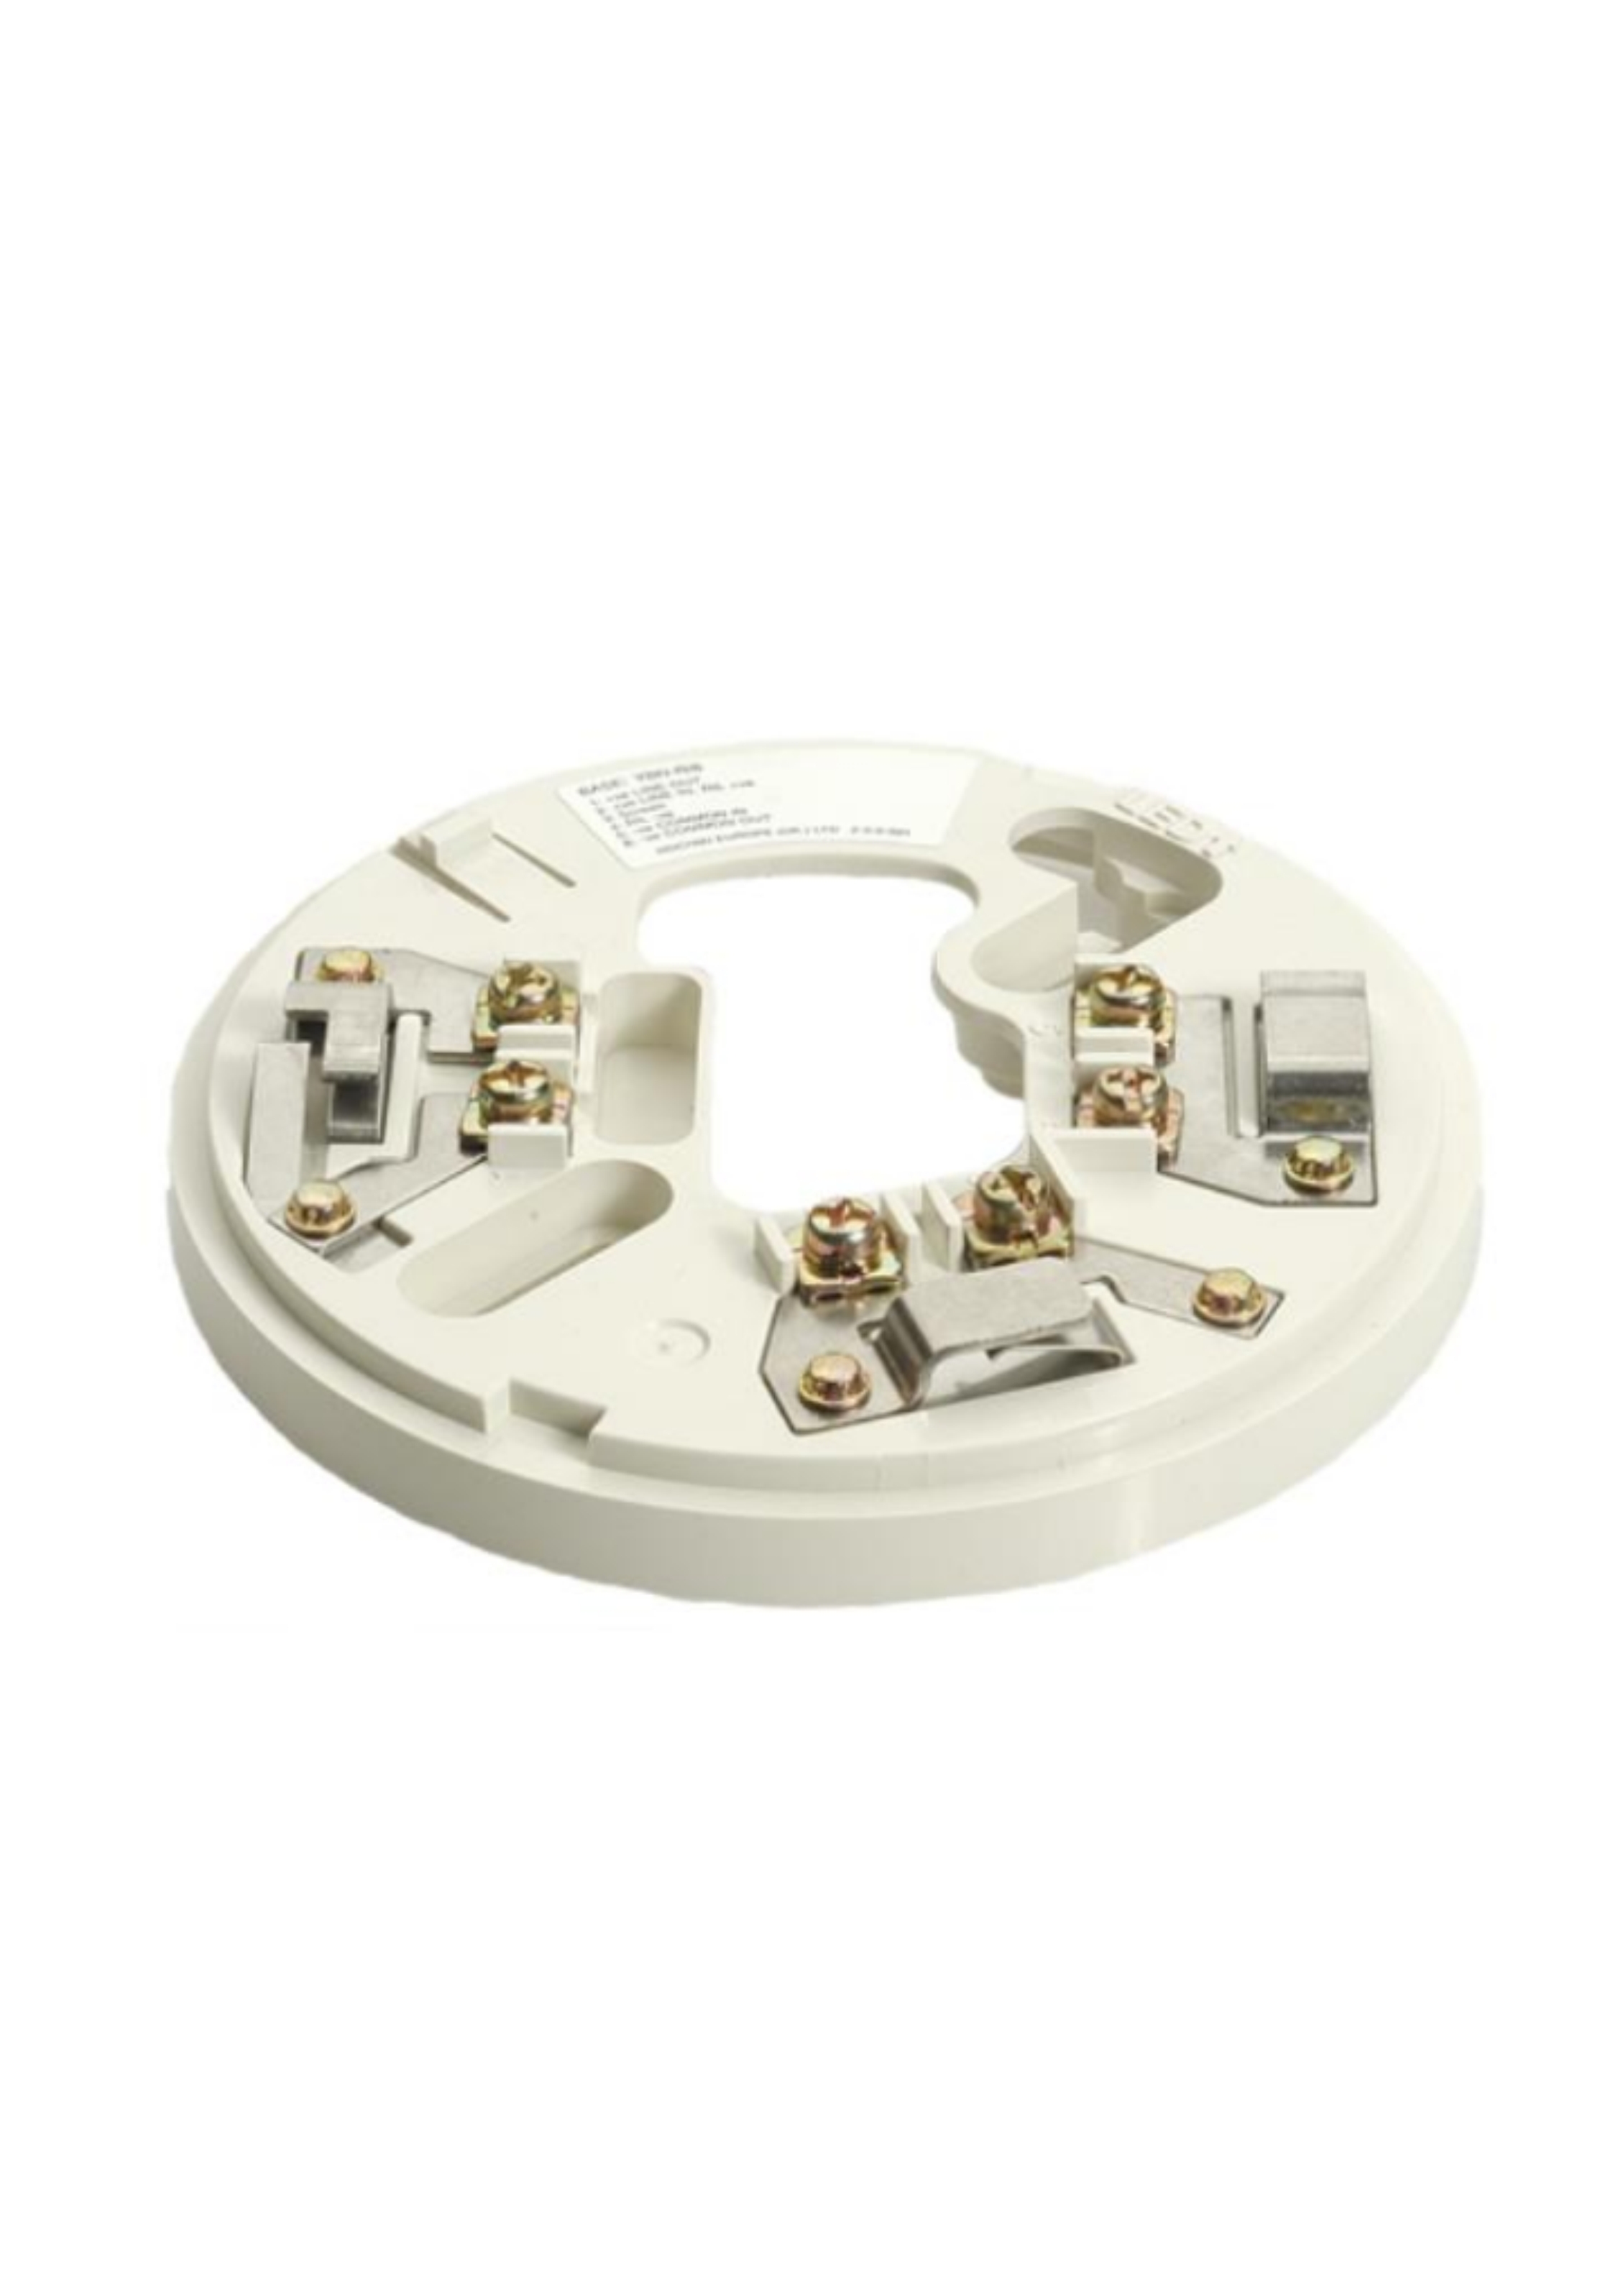 Conventional 2 Wire Base - white 1226200-20